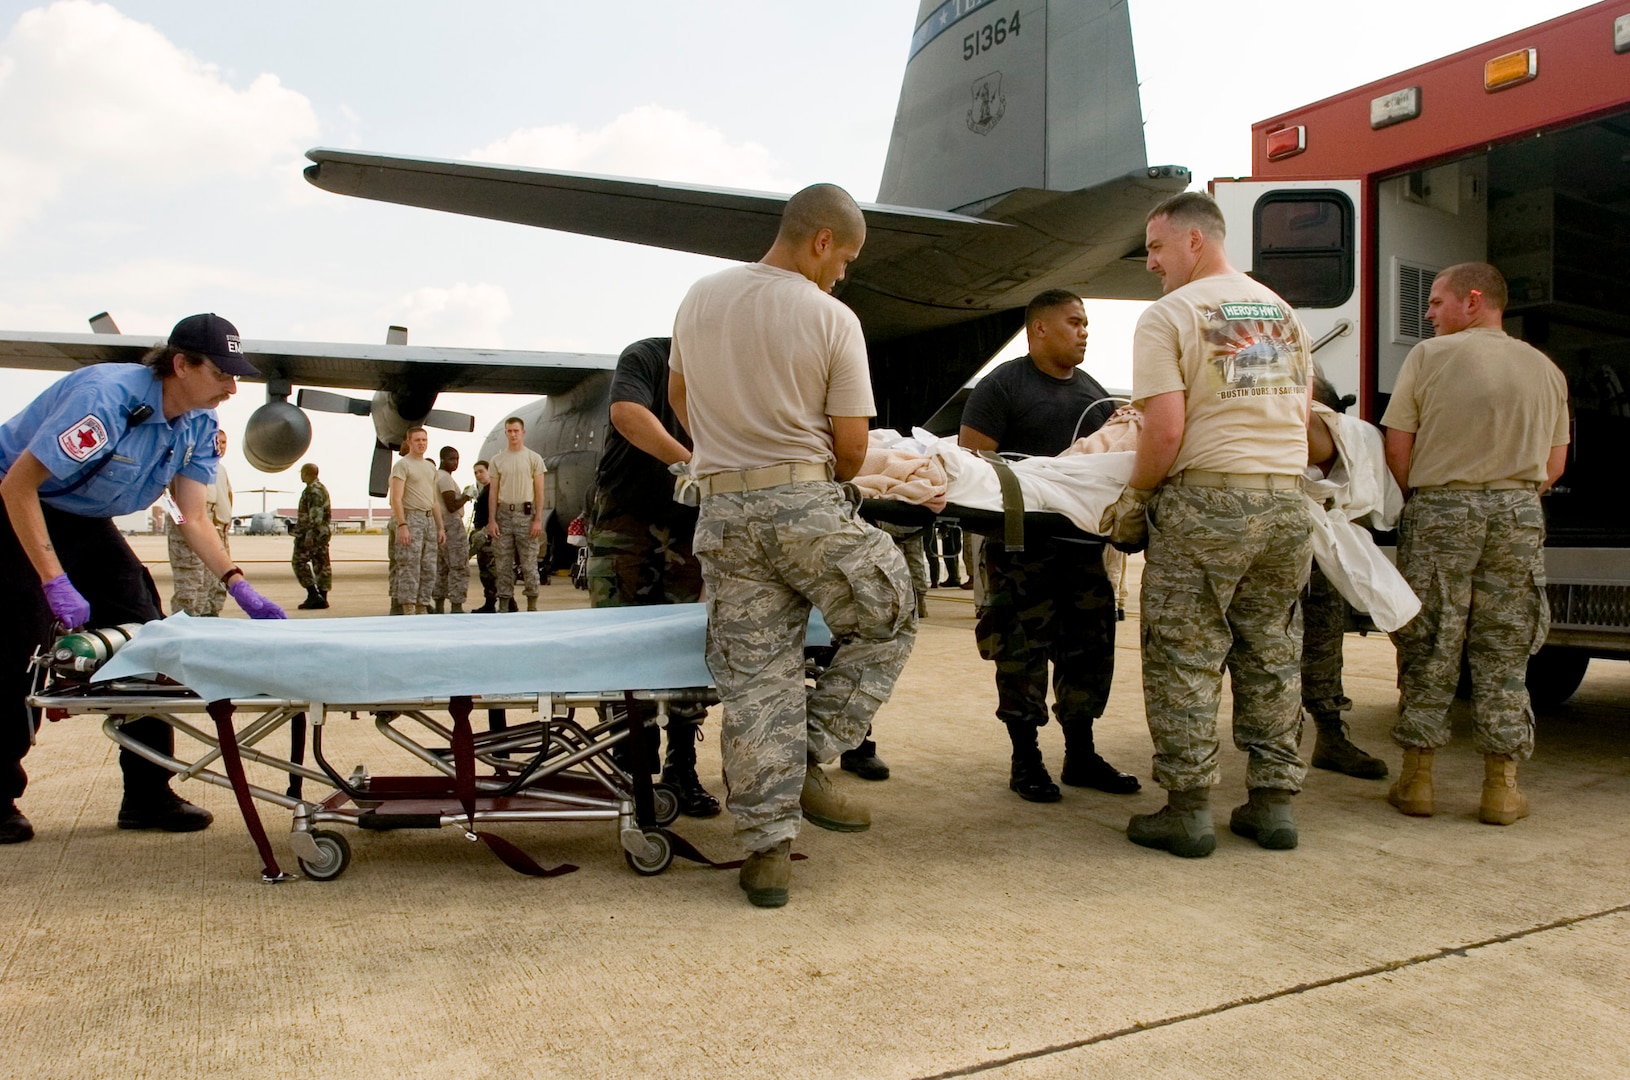 Airmen lift a woman on a litter into an ambulance on the flight line at the former Kelly Air Force Base, Texas, Aug. 30. The Texas Air National Guard C-130 brought 23 evacuees from Beaumont, Texas, to San Antonio before Hurricane Gustav reached the Gulf Coast.  Members from the 37th Training Wing and 59th Medical Wing at Lackland AFB, Texas, and from the Air National Guard and Air Force Reserve help in the hurricane relief efforts as Hurricane Gustav approaches the Gulf Coast. The Port of San Antonio on Kelly AFB is the staging base for FEMA Region 6.  (U.S. Air Force photo/Staff Sgt. Desiree N. Palacios)